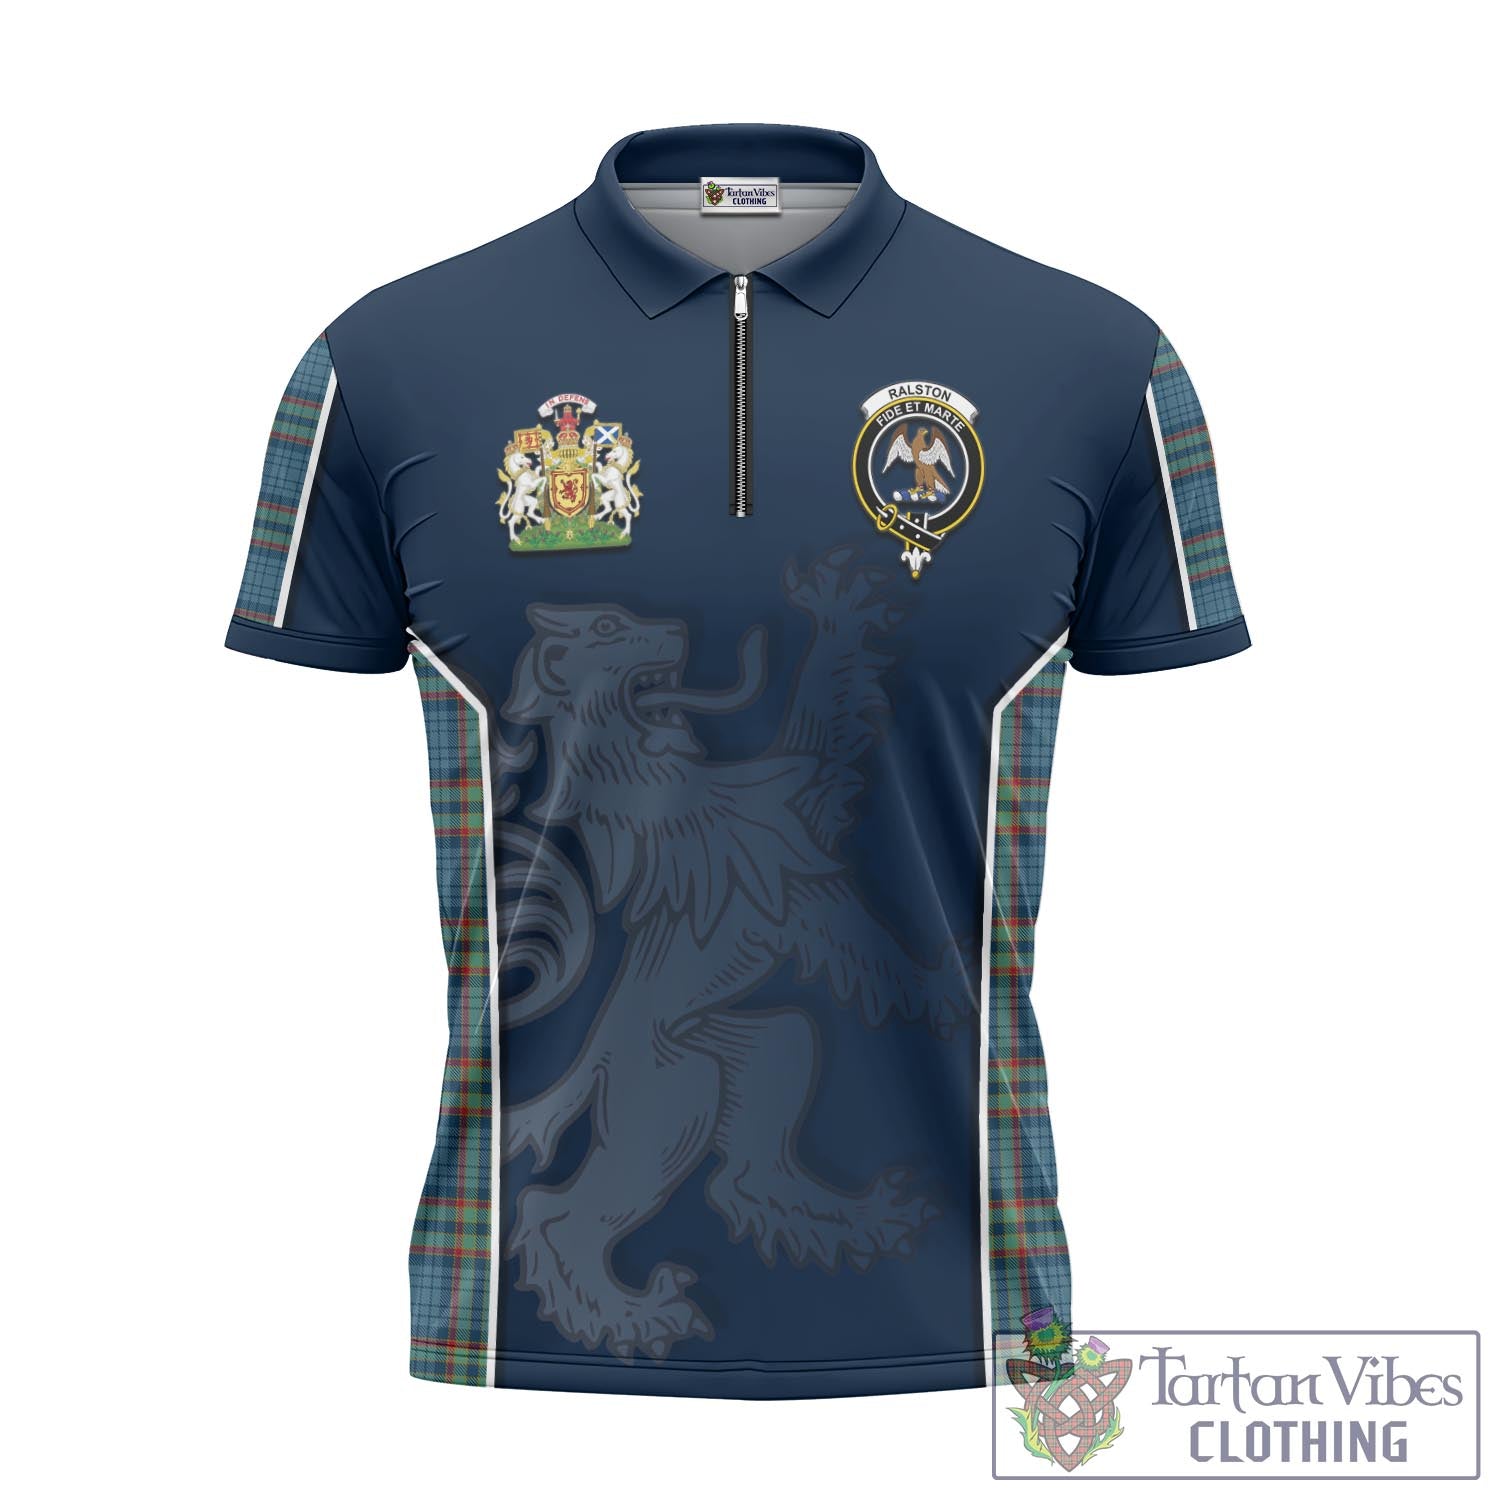 Tartan Vibes Clothing Ralston UK Tartan Zipper Polo Shirt with Family Crest and Lion Rampant Vibes Sport Style